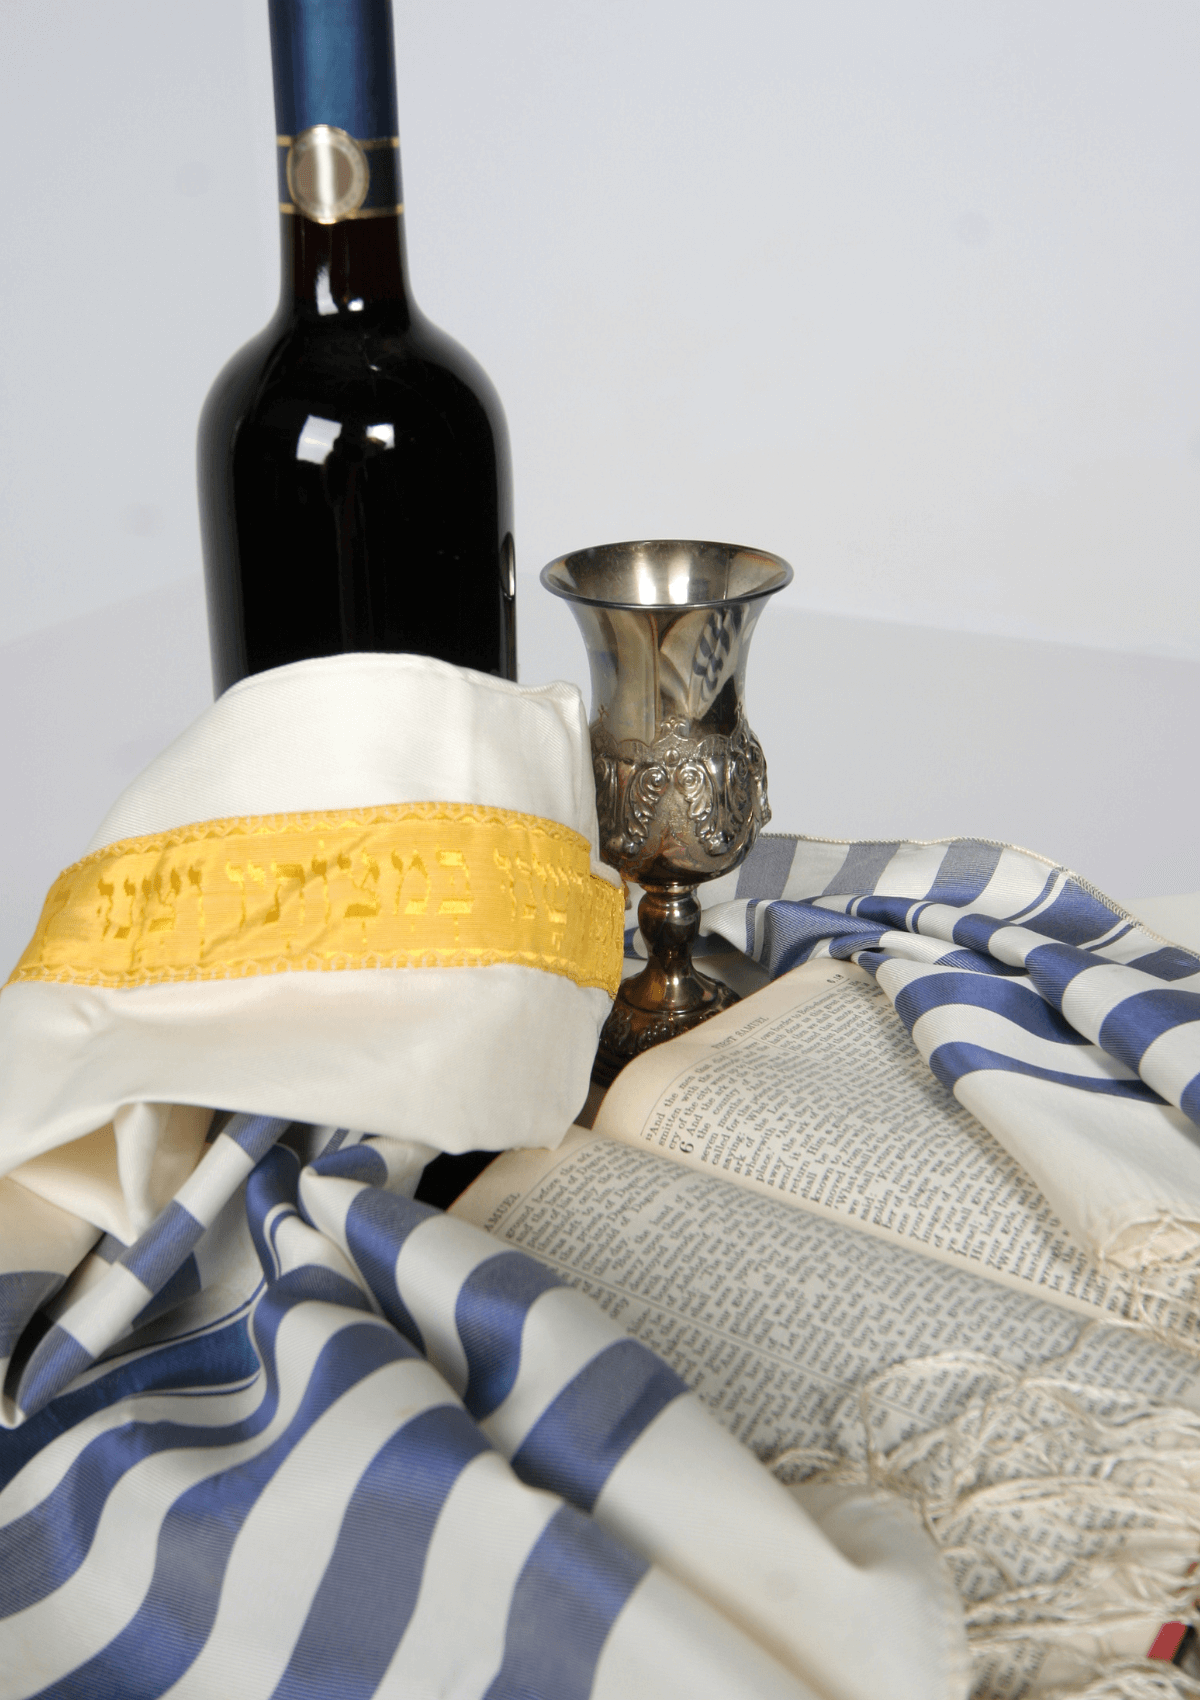 Judaica historical Jewish items are typical and the best souvenirs to buy in Israel